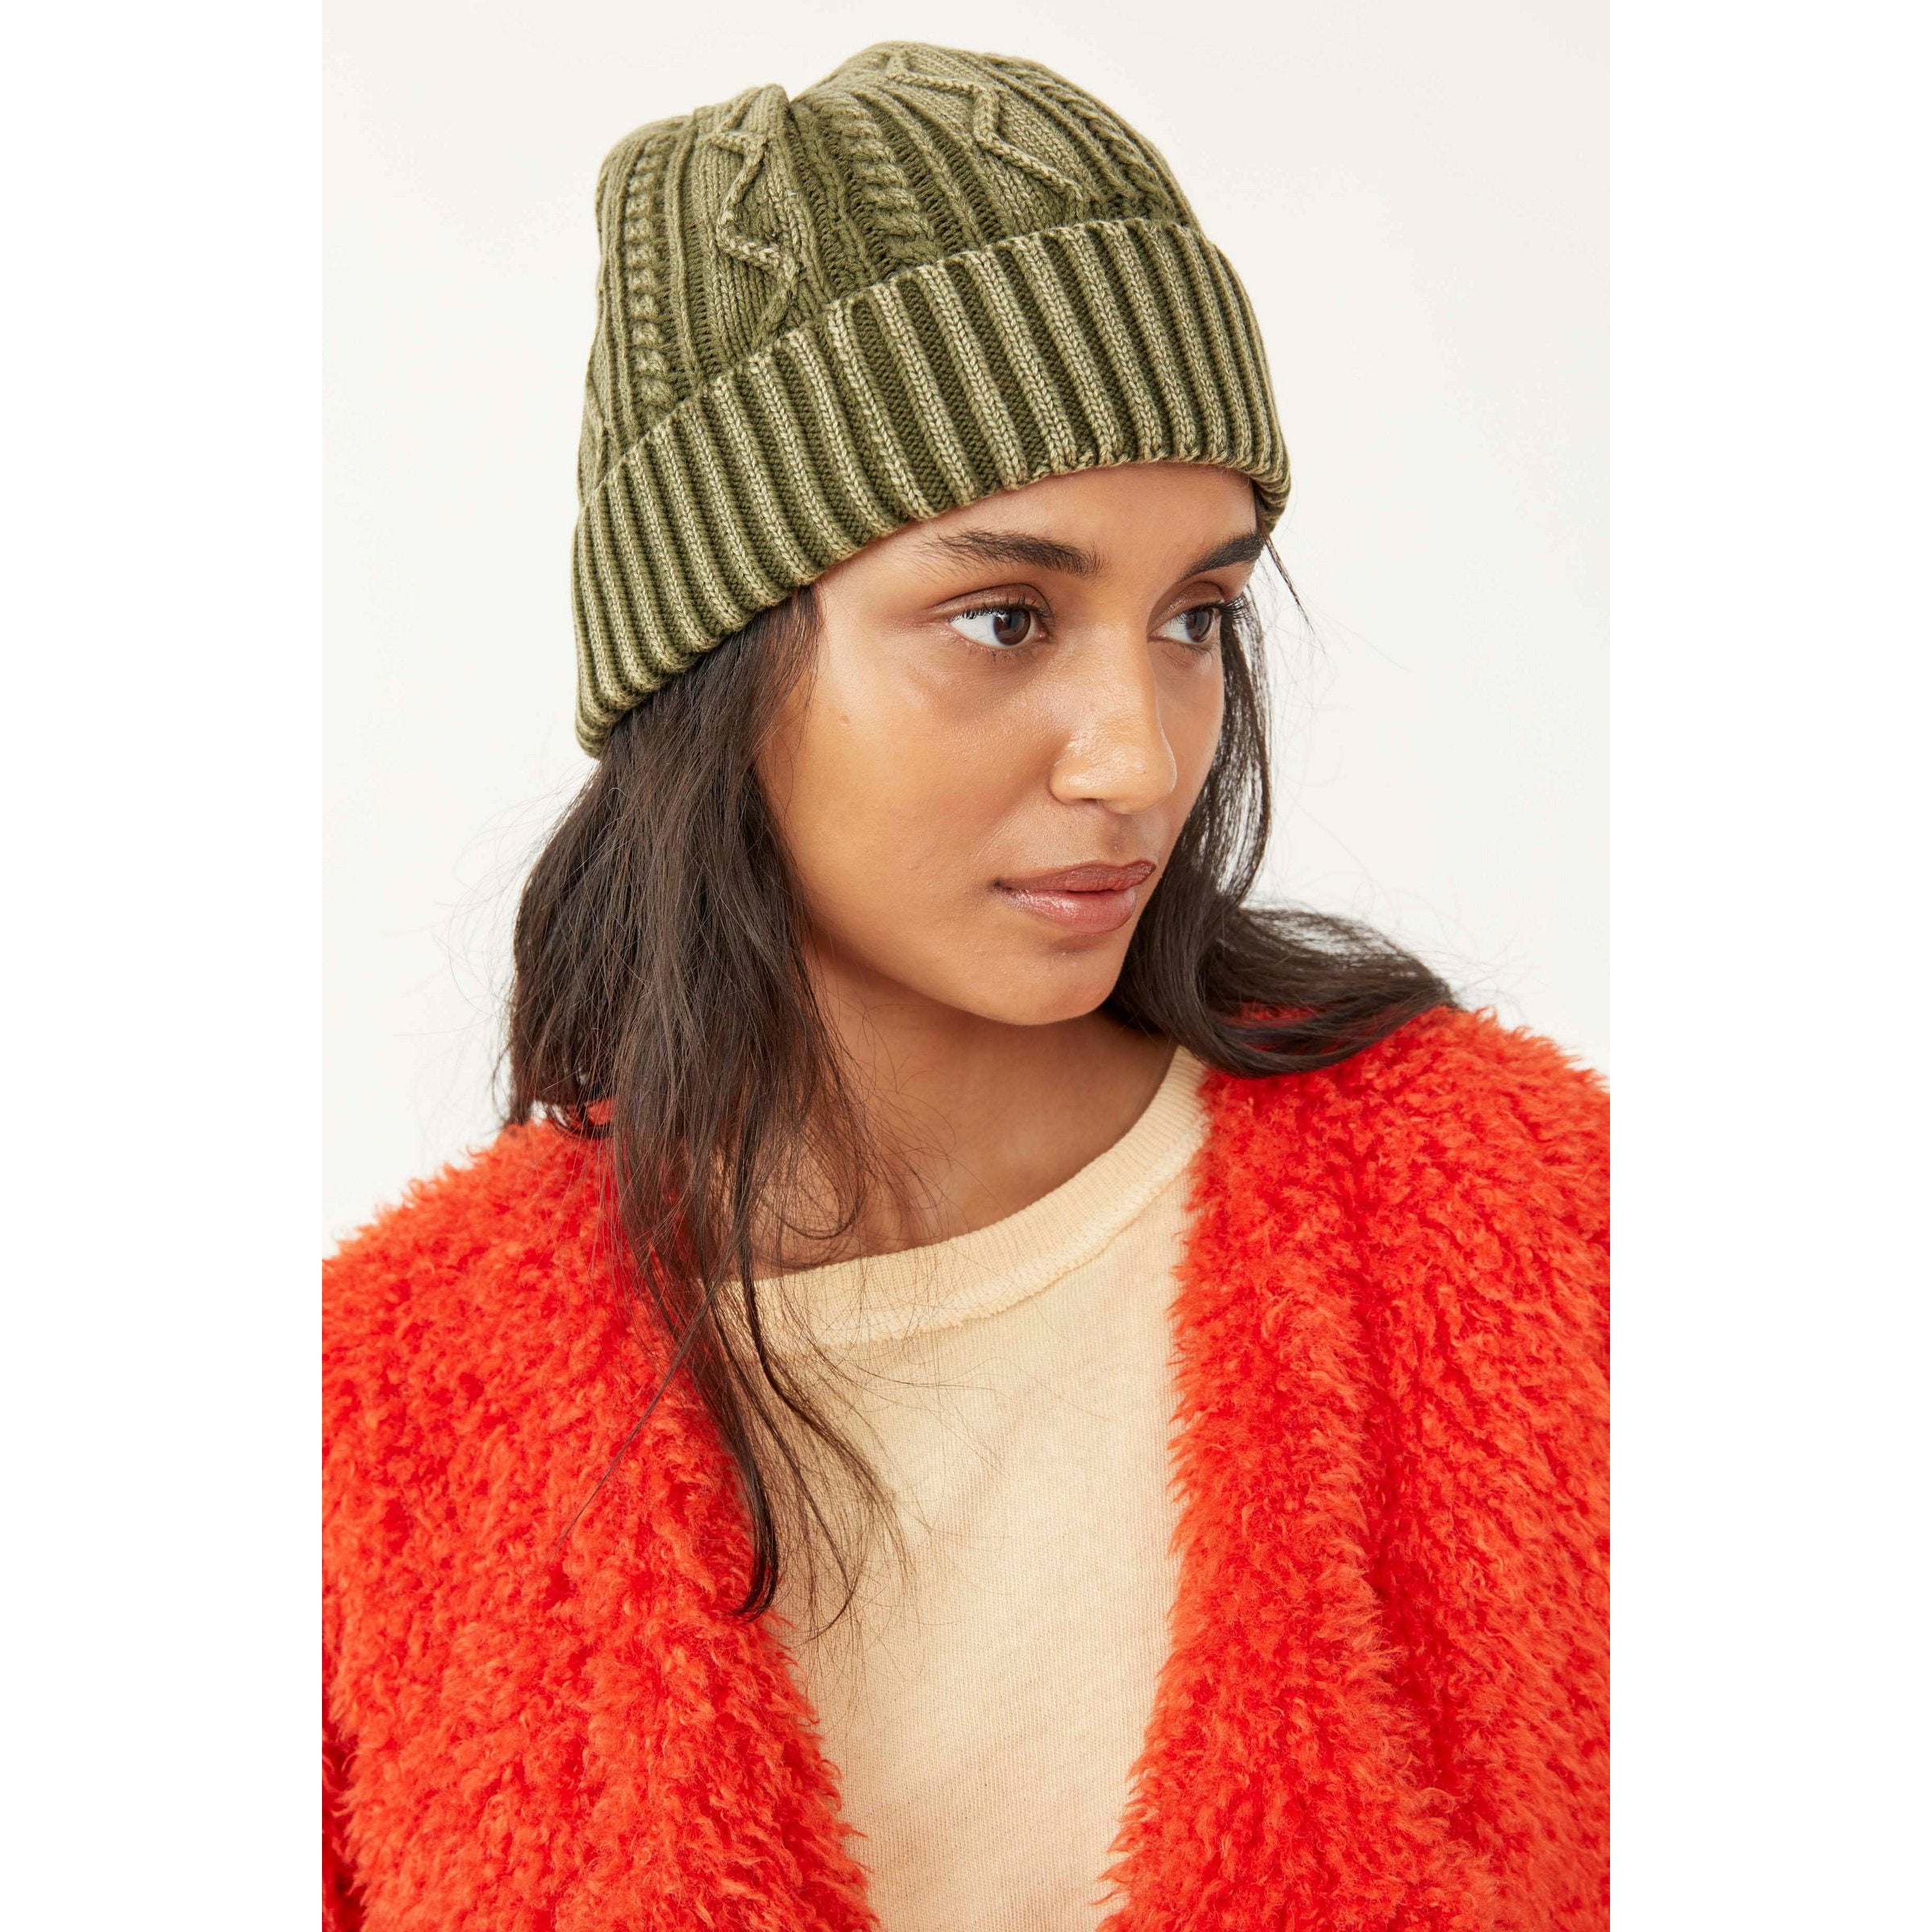 Stormi Washed Cable Beanie